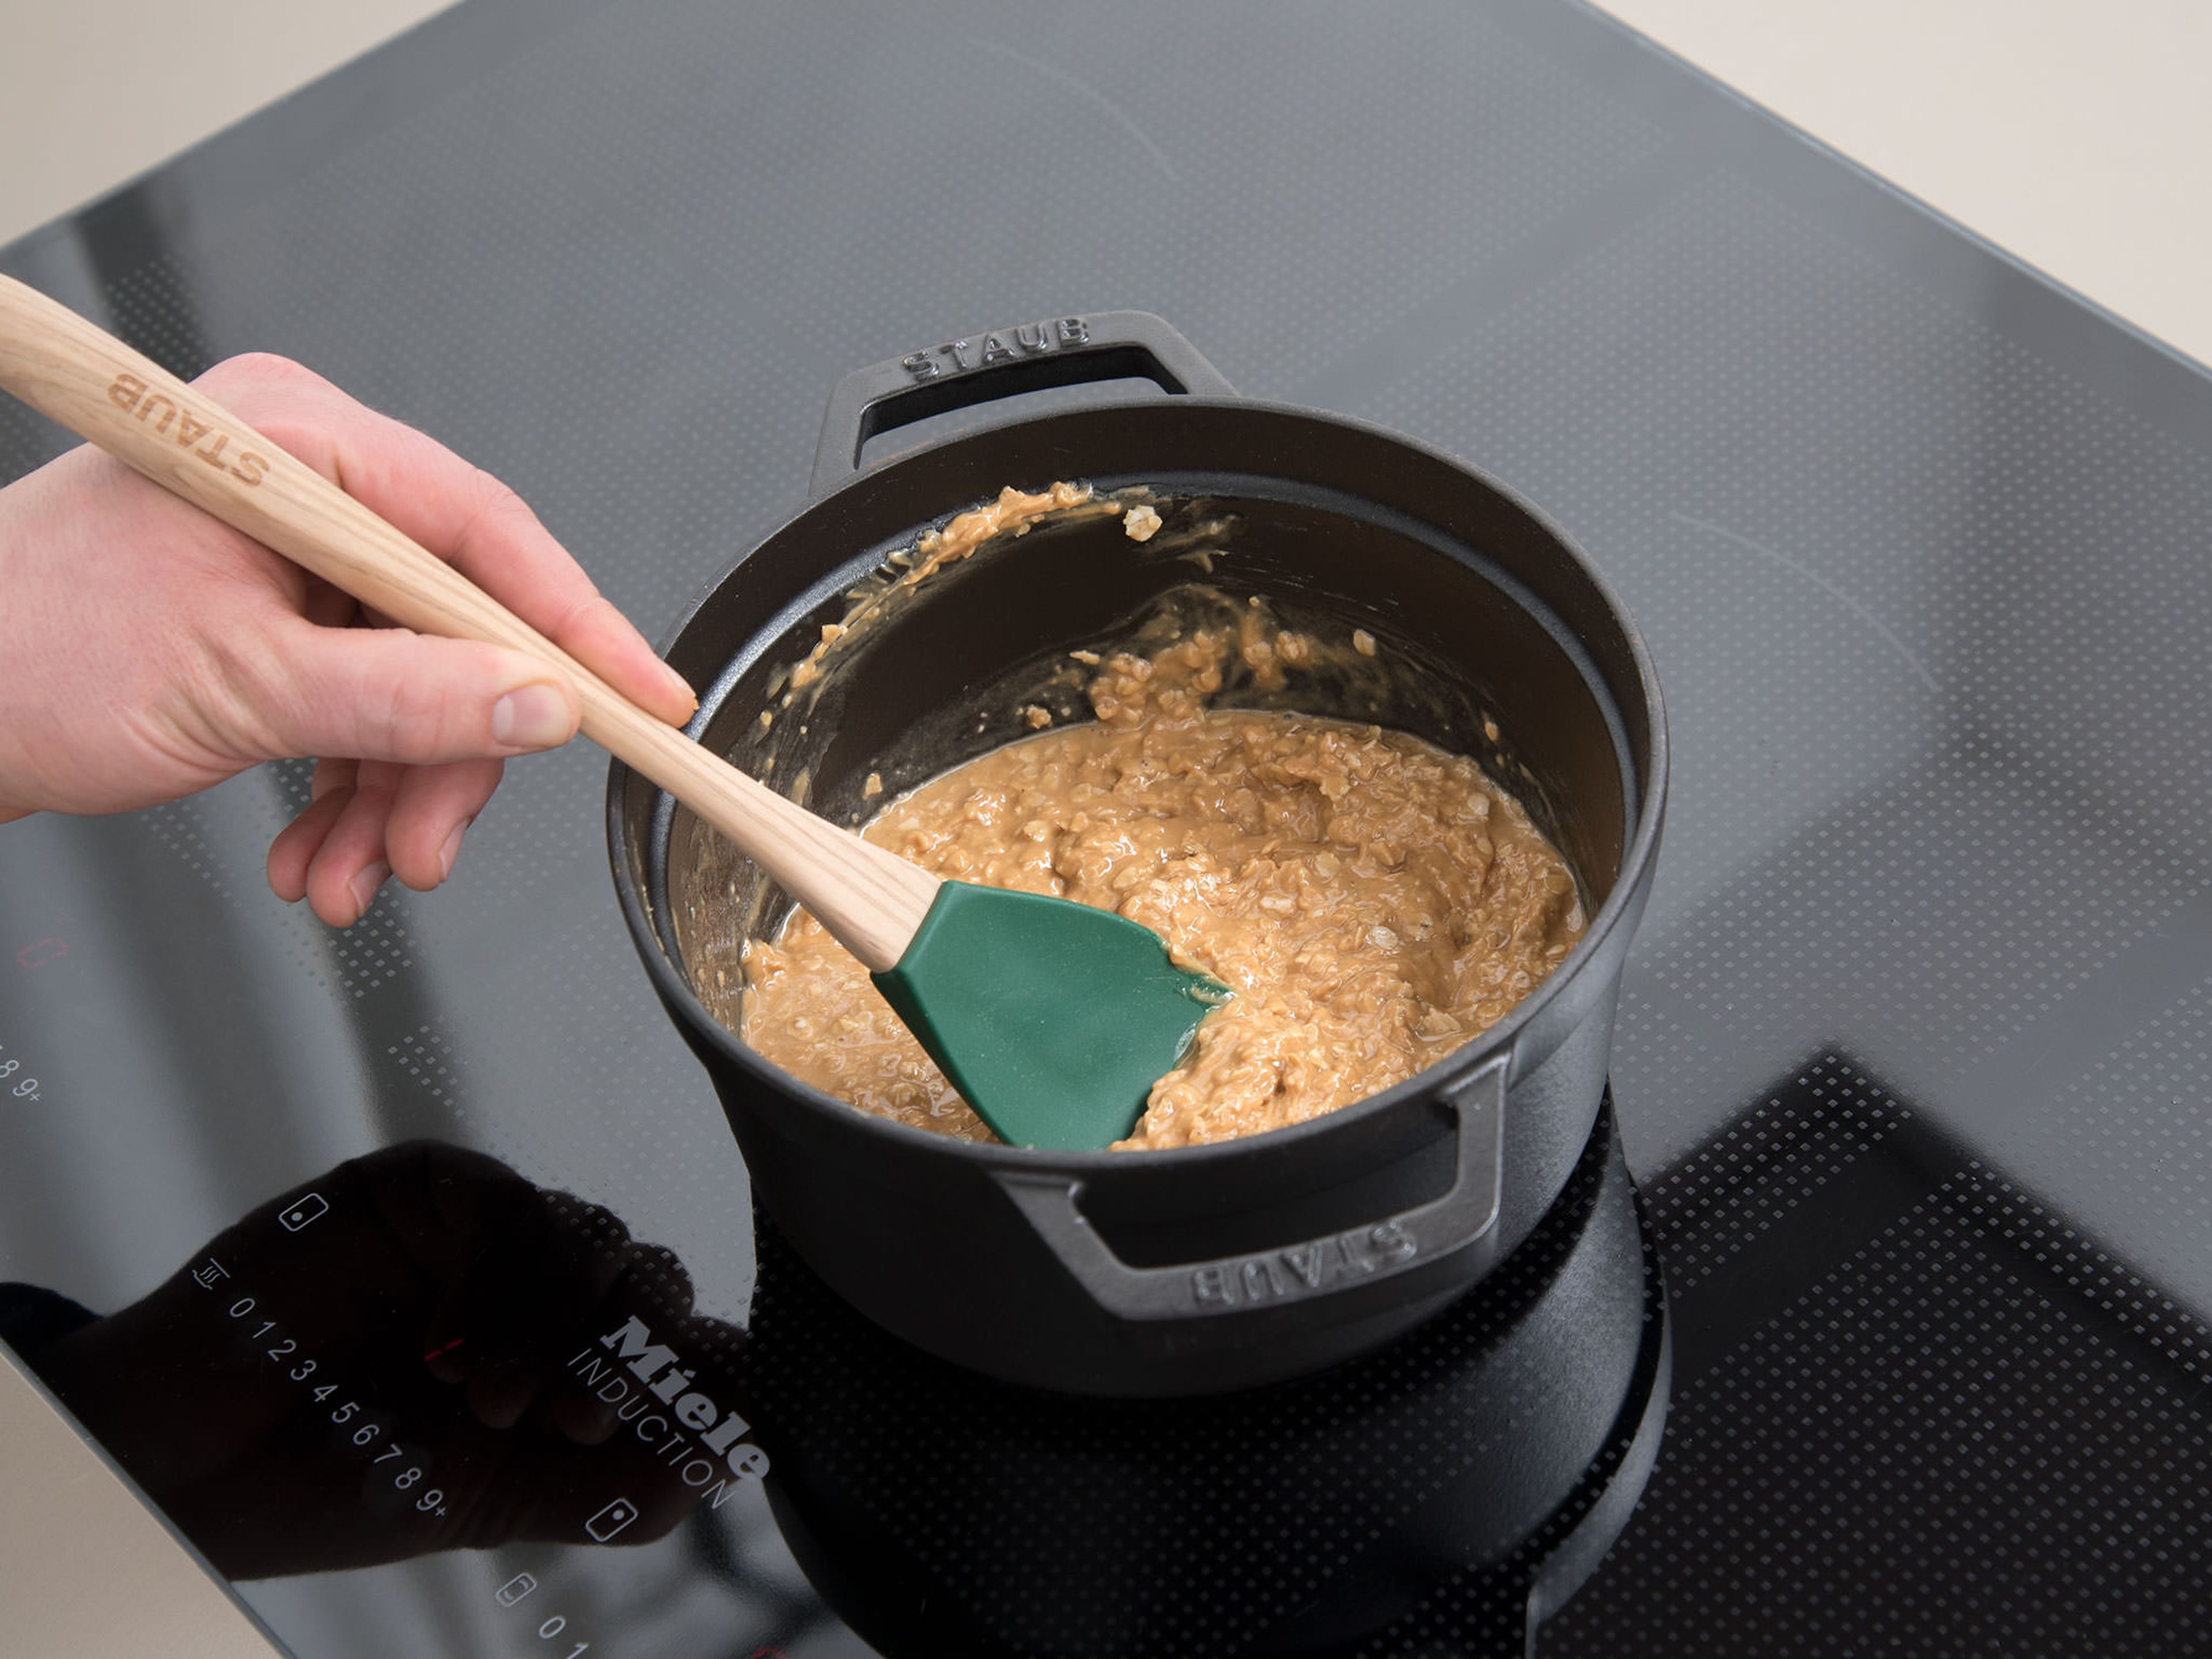 In a bowl, mix peanut butter, maple syrup and rolled oats with a rubber spatula. Melt the coconut oil in a small pot over low heat and add the peanut butter mixture to the pot. Cook for approx. 1 min.